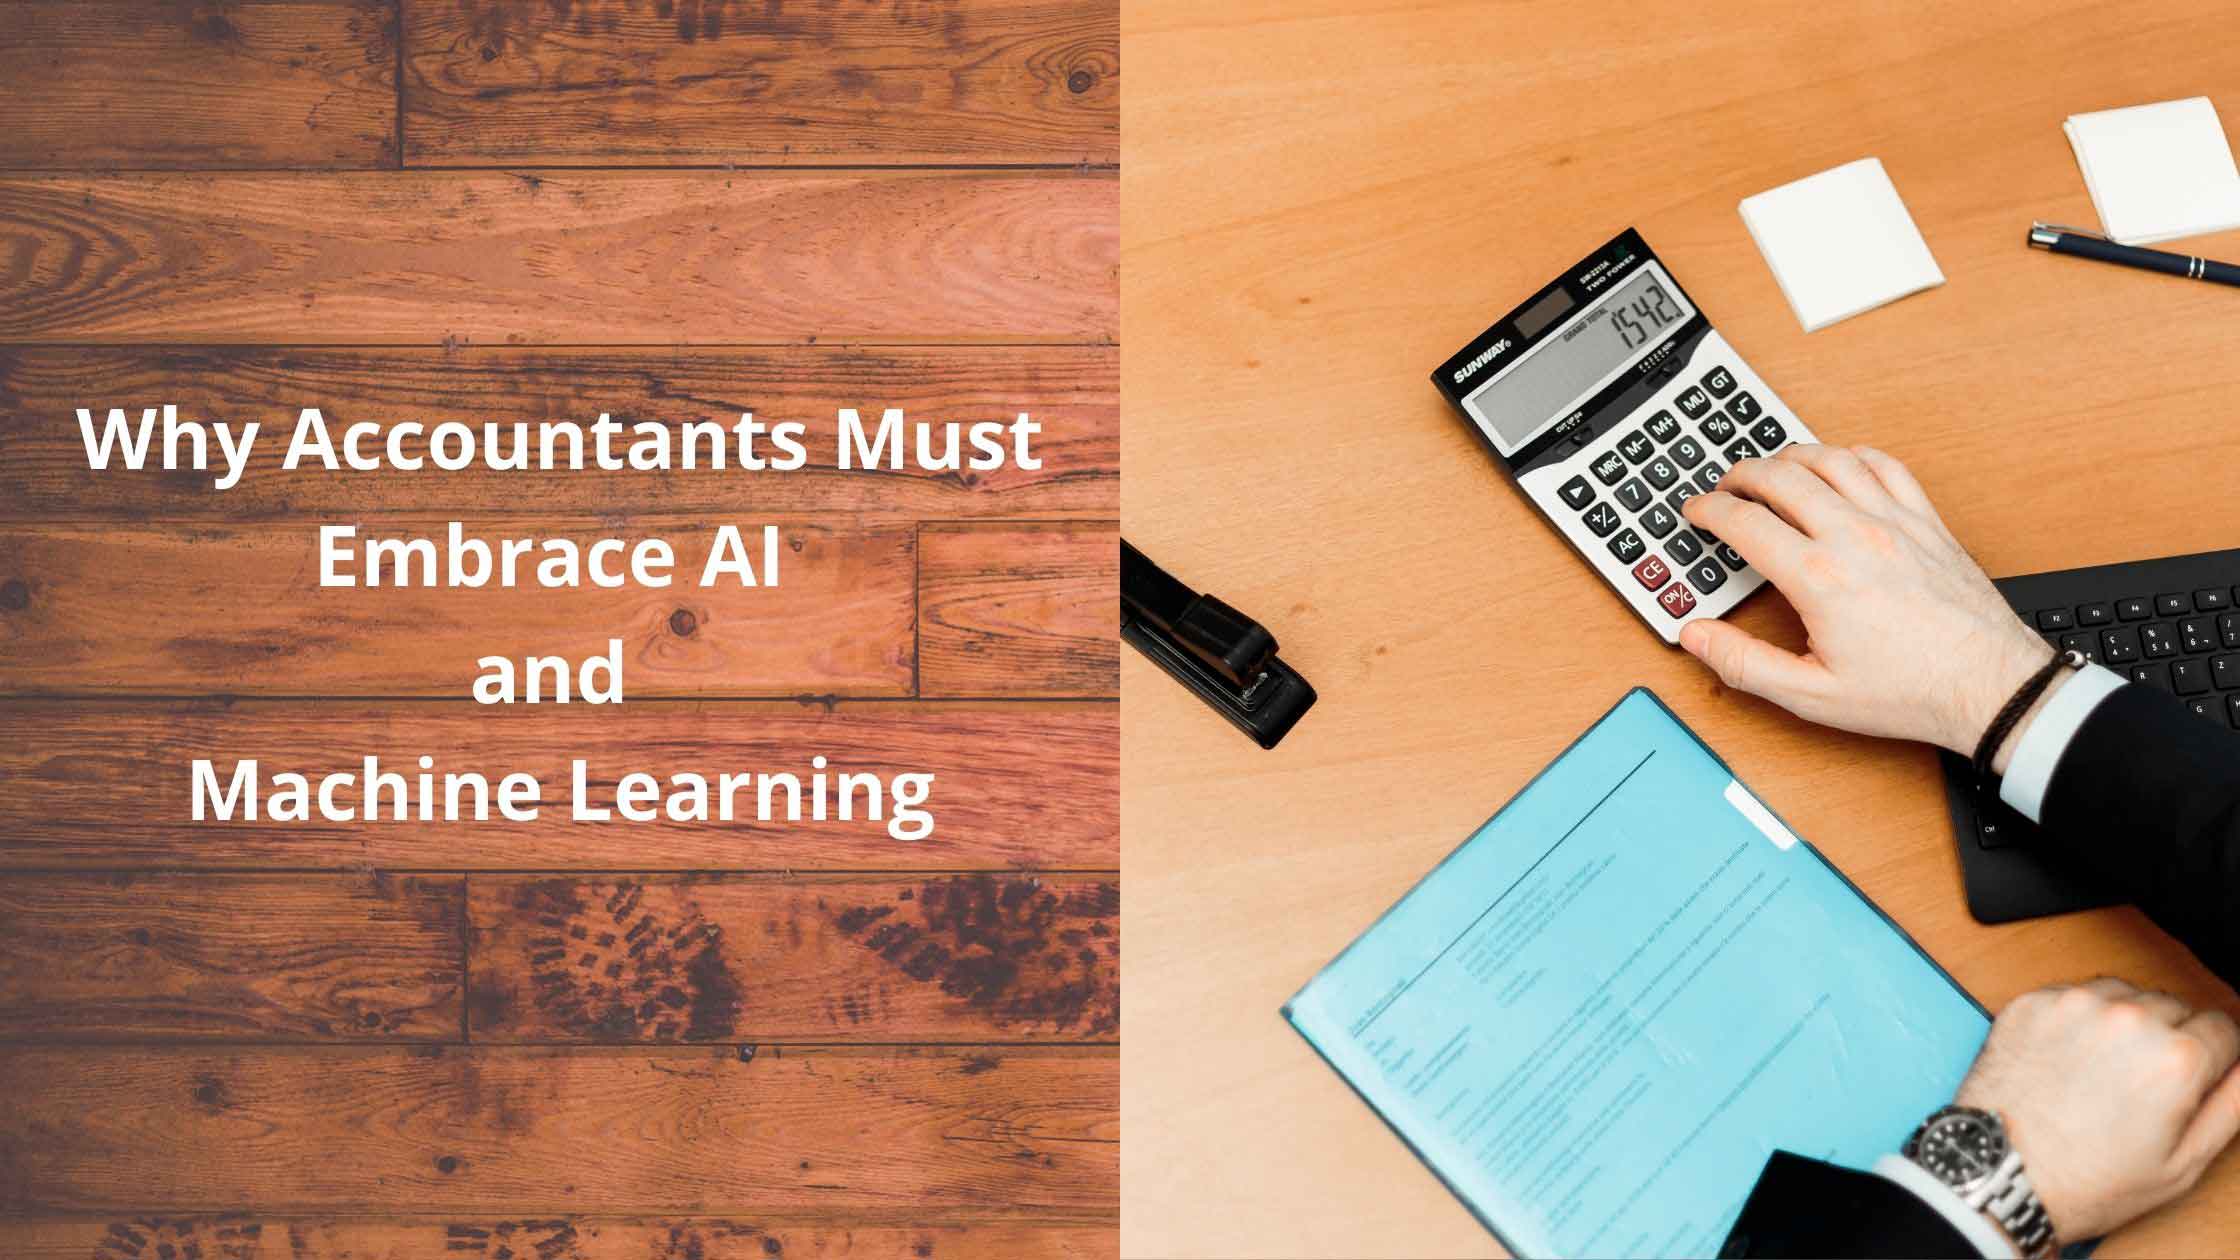 Why Accountants Must Embrace AI and Machine Learning